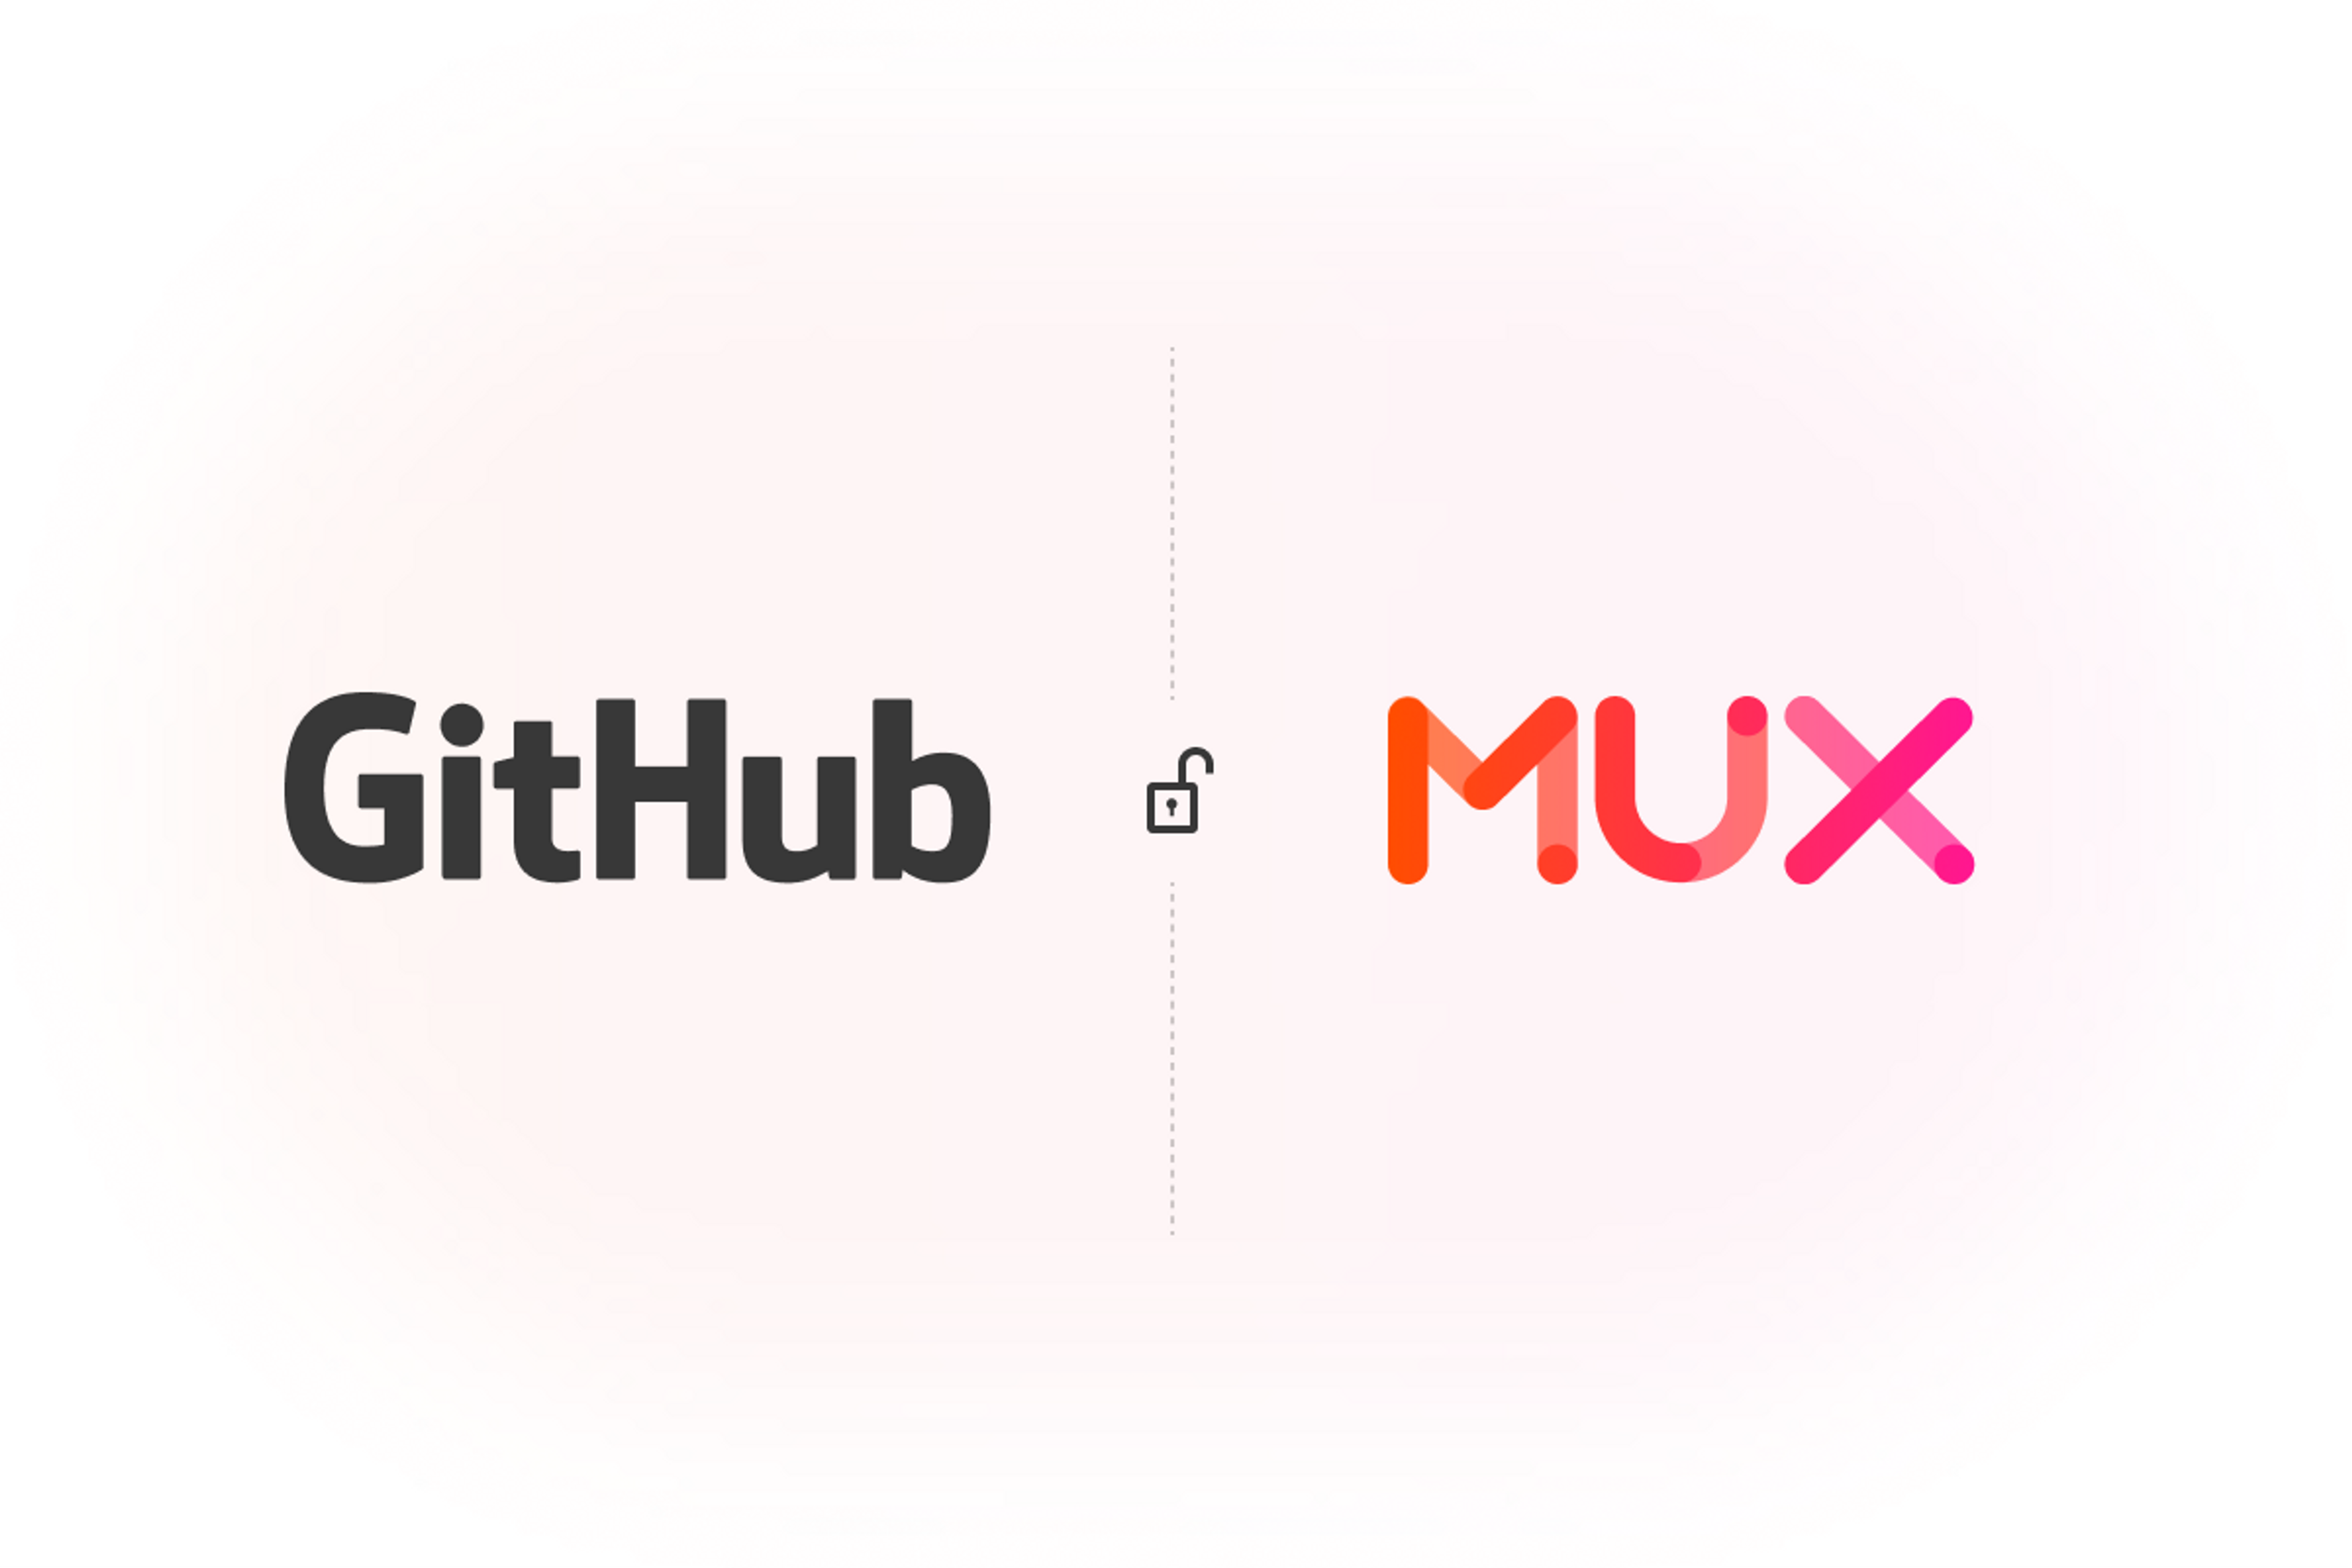 GitHub and Mux logos, with lock between them.